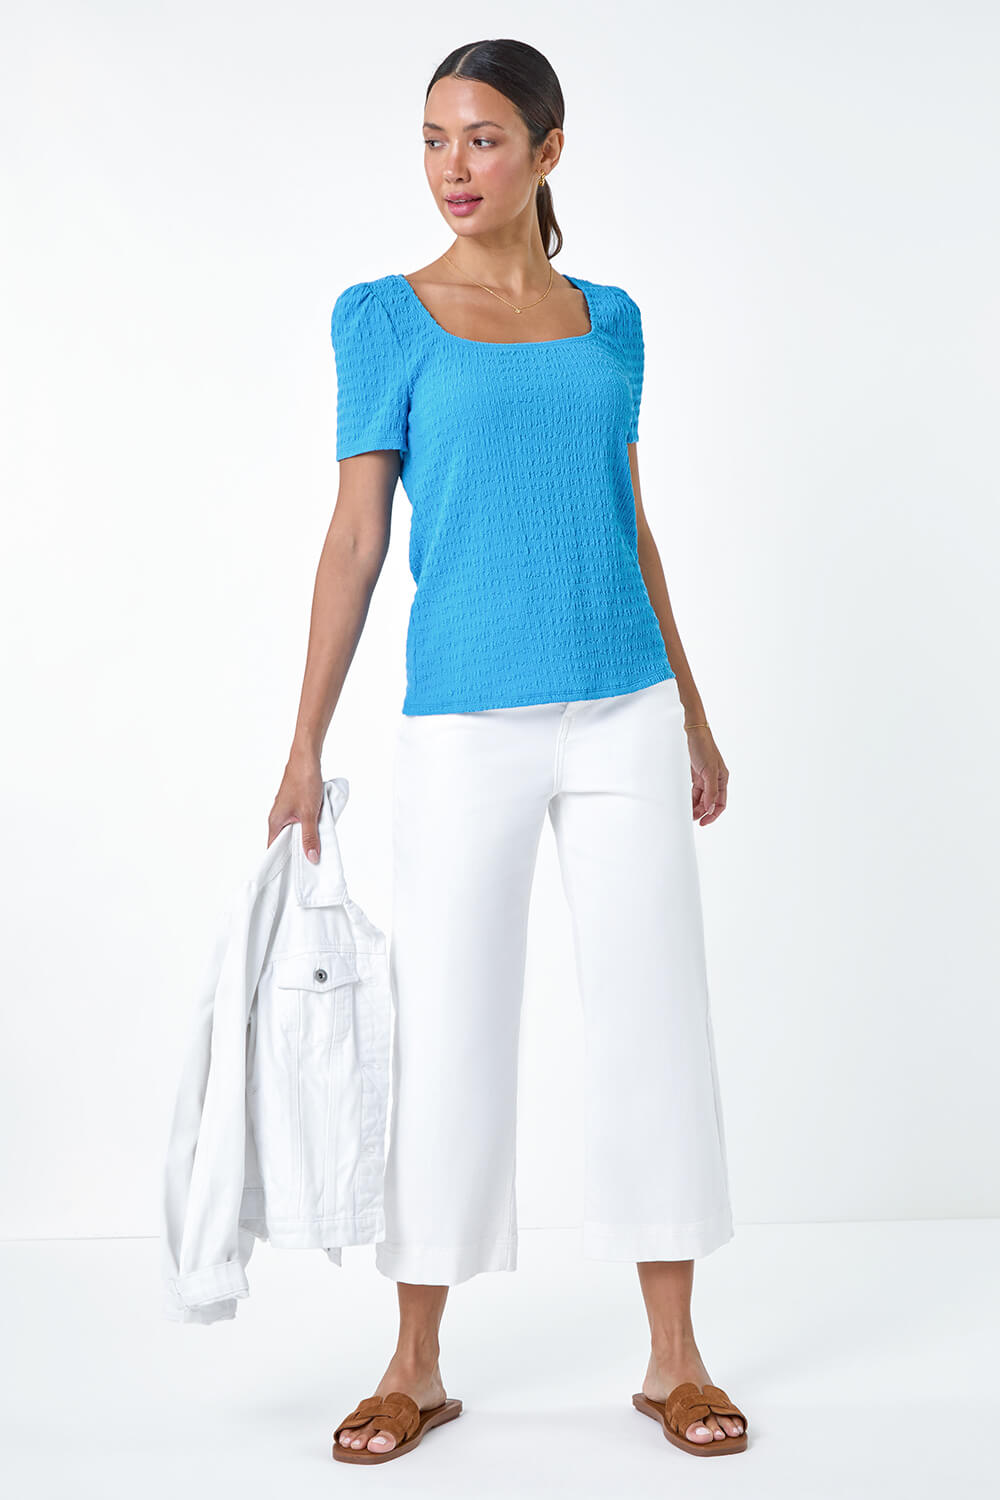 Turquoise Textured Square Neck Stretch Top, Image 2 of 5